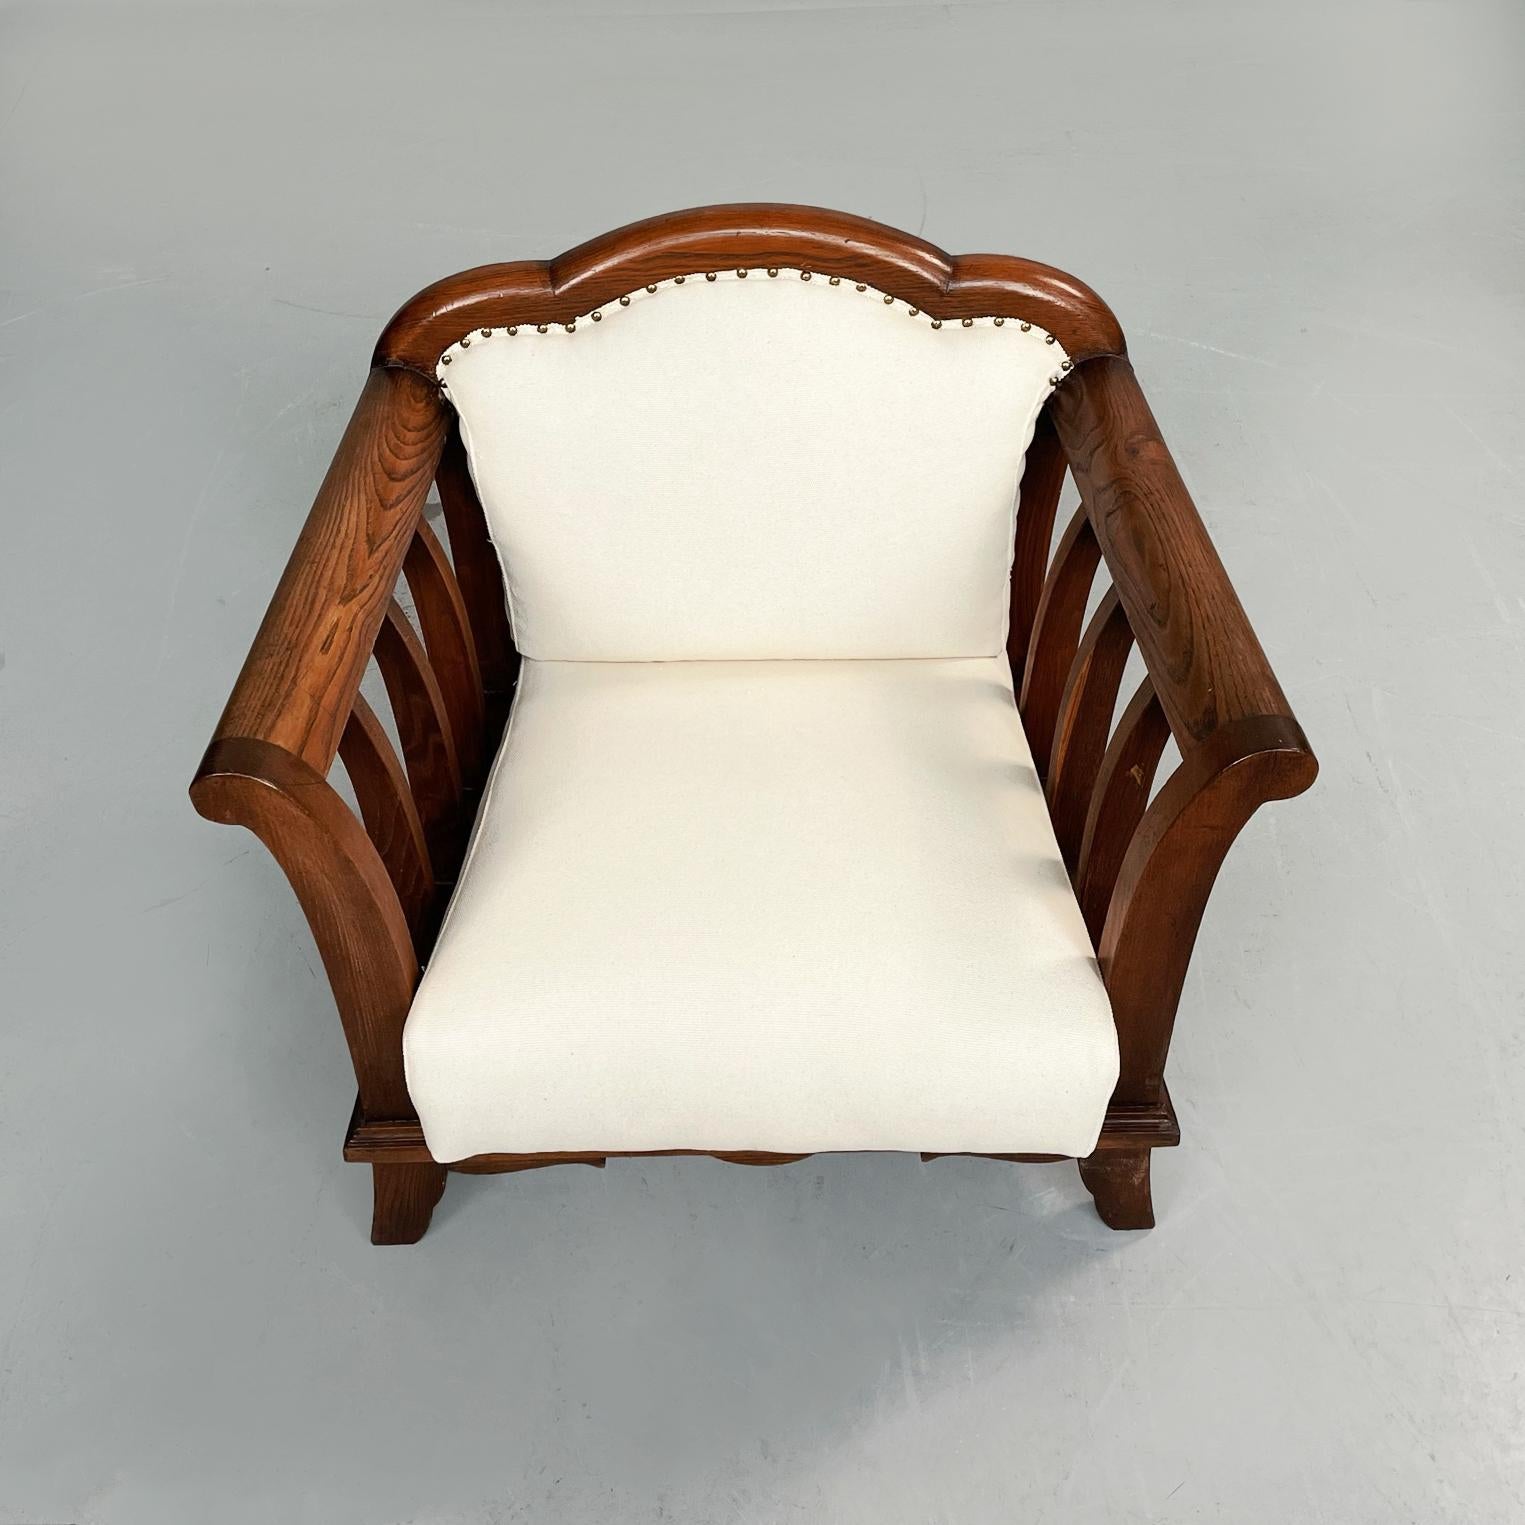 Italian Modern Wooden Armchairs with White Fabric, 1940s In Good Condition For Sale In MIlano, IT